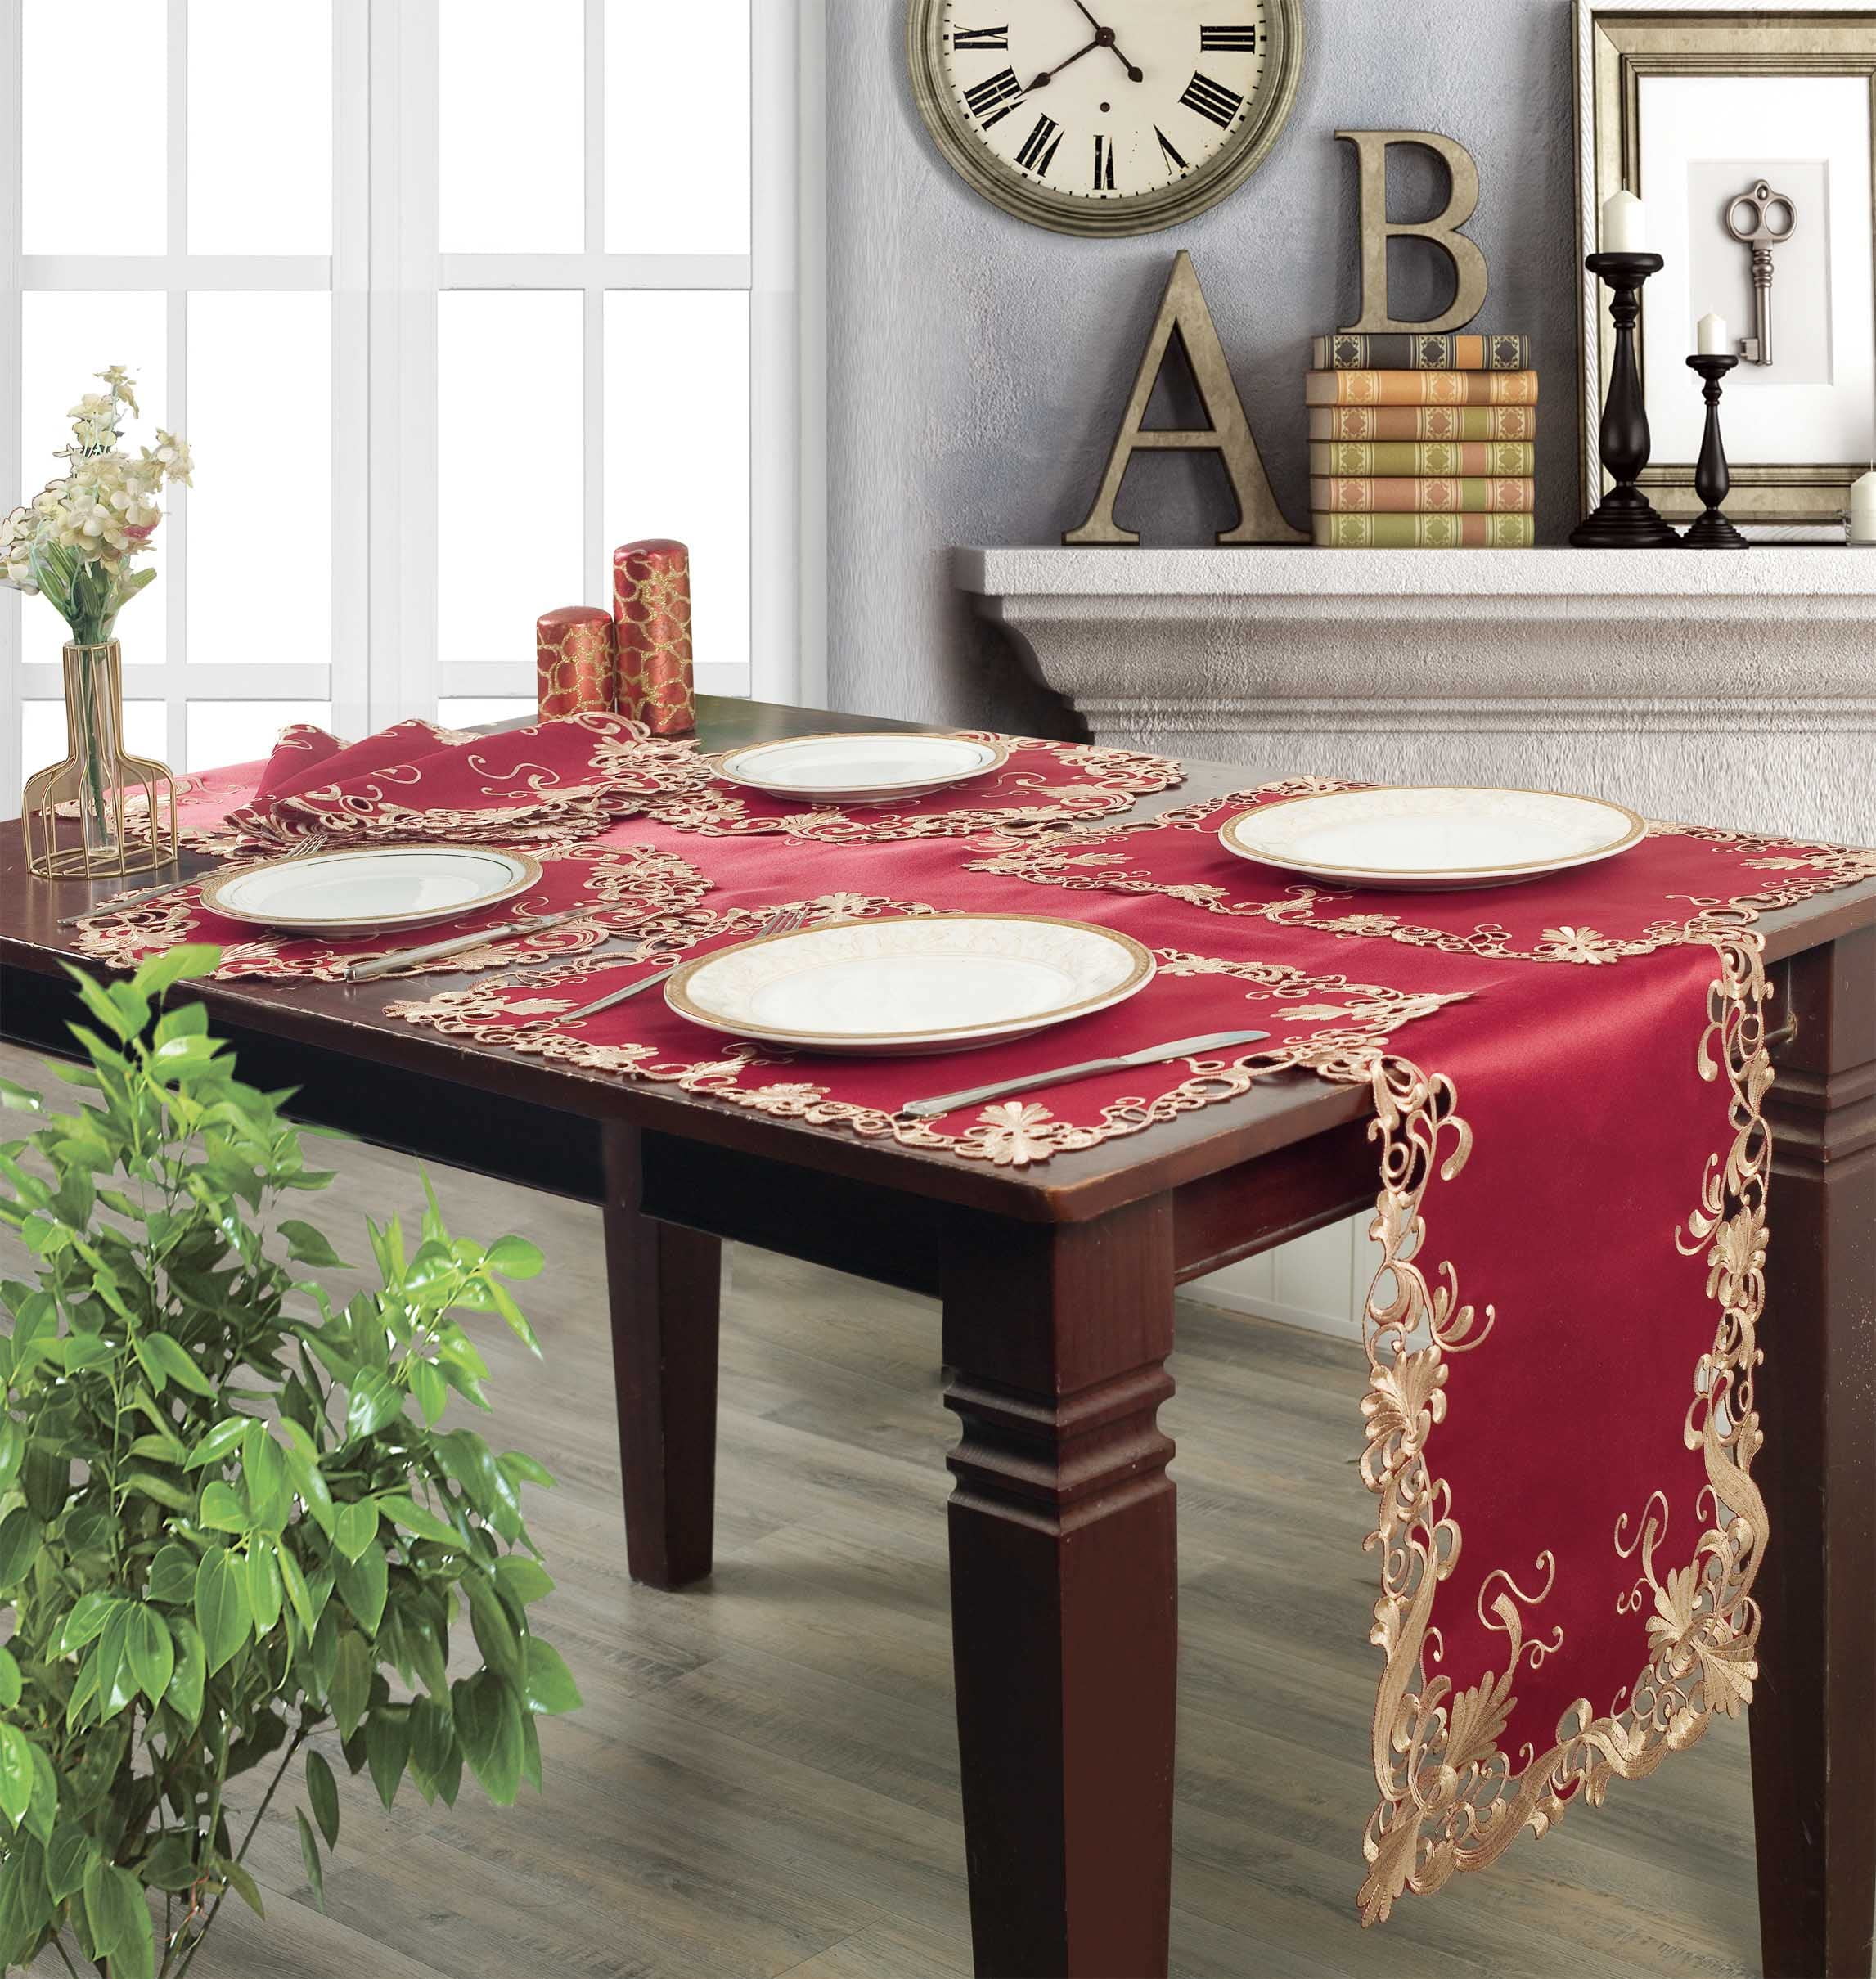  Table Runner Rustic Country Star Texas Dresser Scarves Runners  Red Berries Country Rustic Table Decor for Kitchen Dining Room Bedroom  Coffee Table 13x120 inches : Home & Kitchen